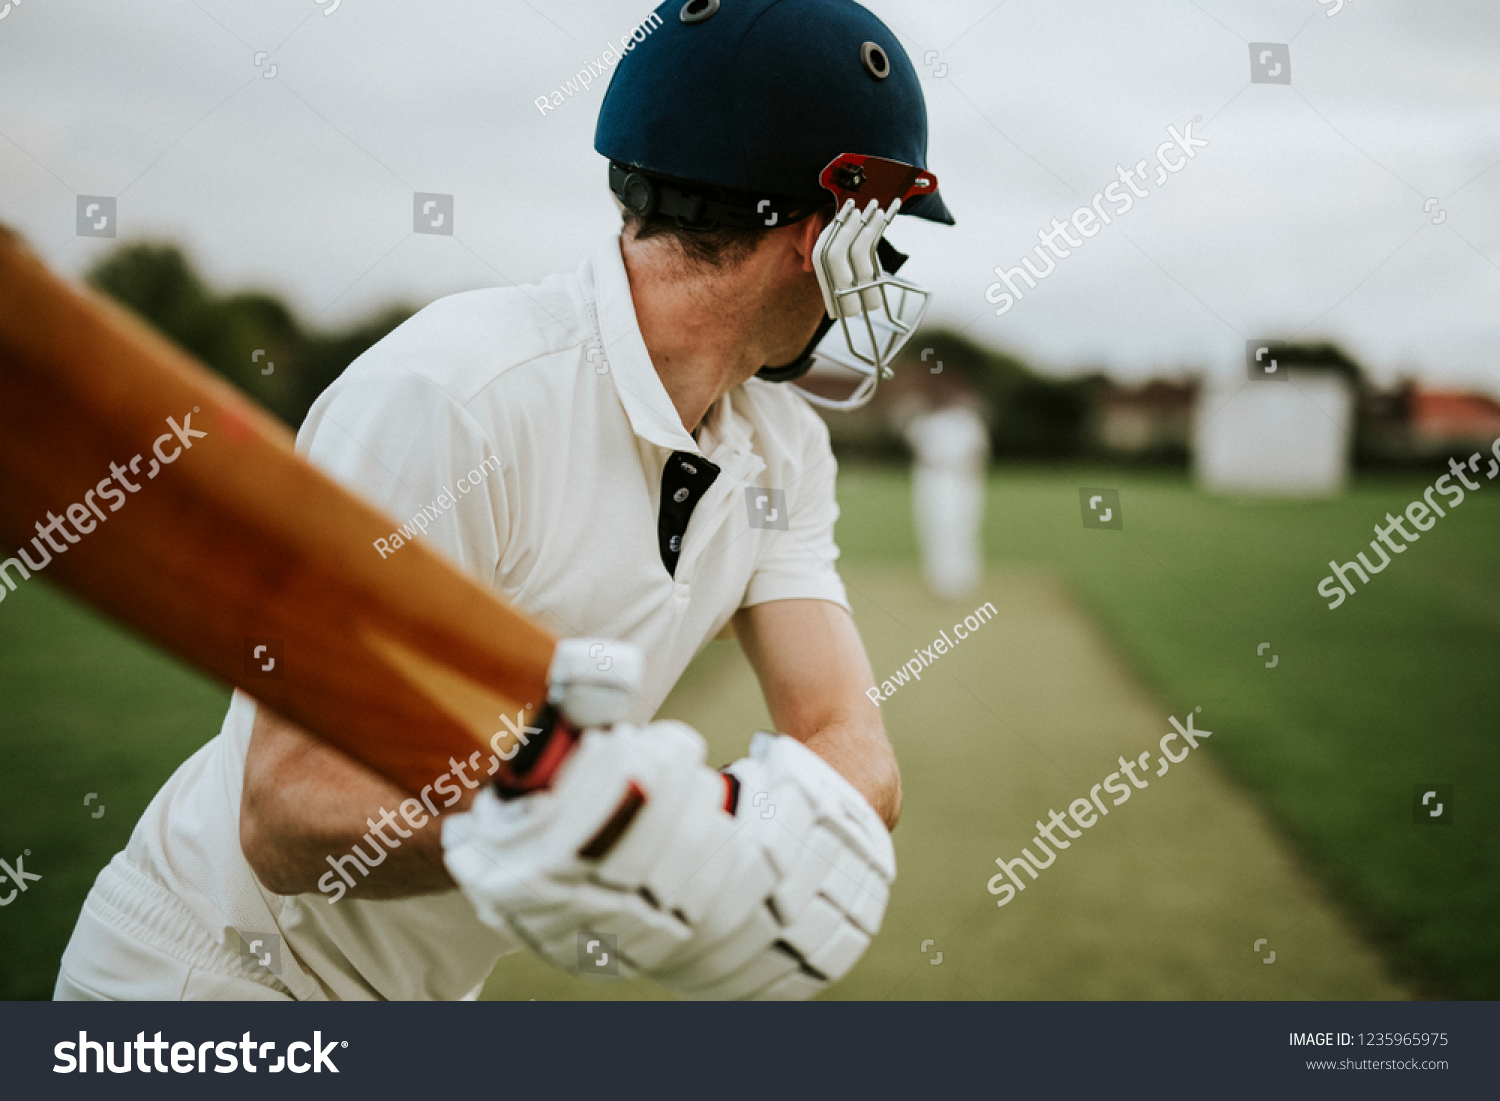 Cricketer on the field in action #1235965975